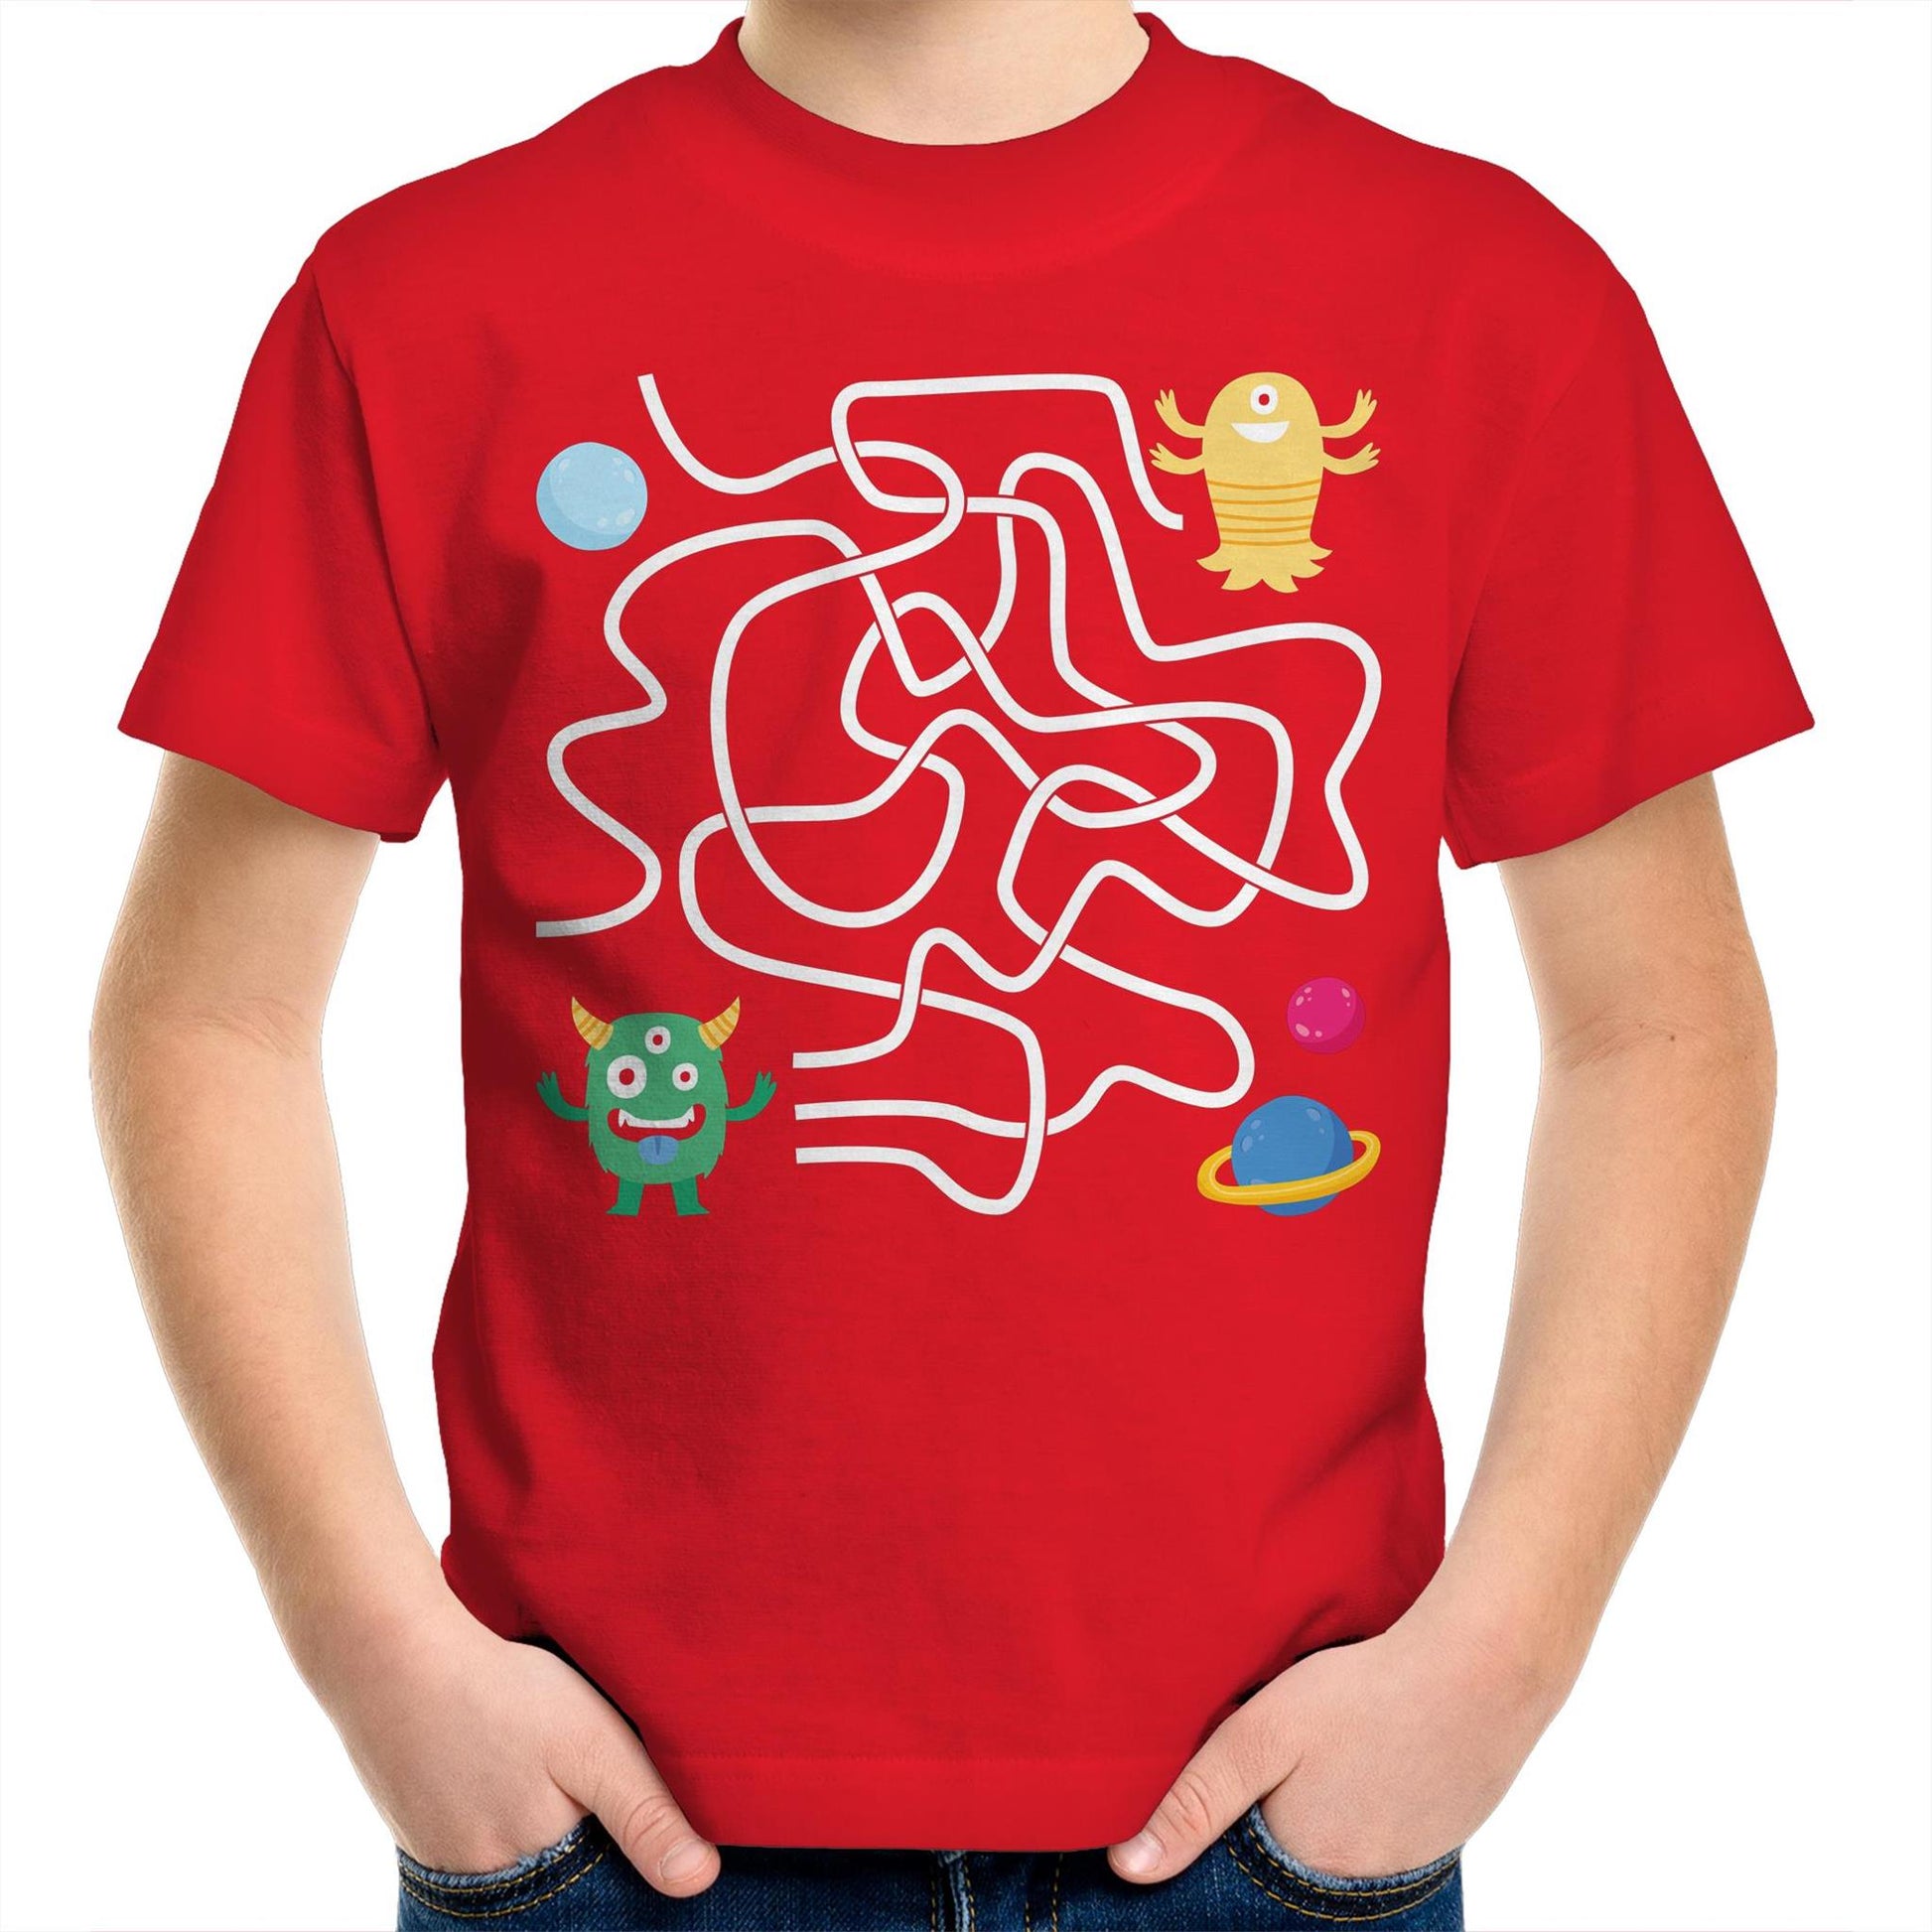 Find The Right Path, Space Alien - Kids Youth T-Shirt Red Kids Youth T-shirt Sci Fi Space